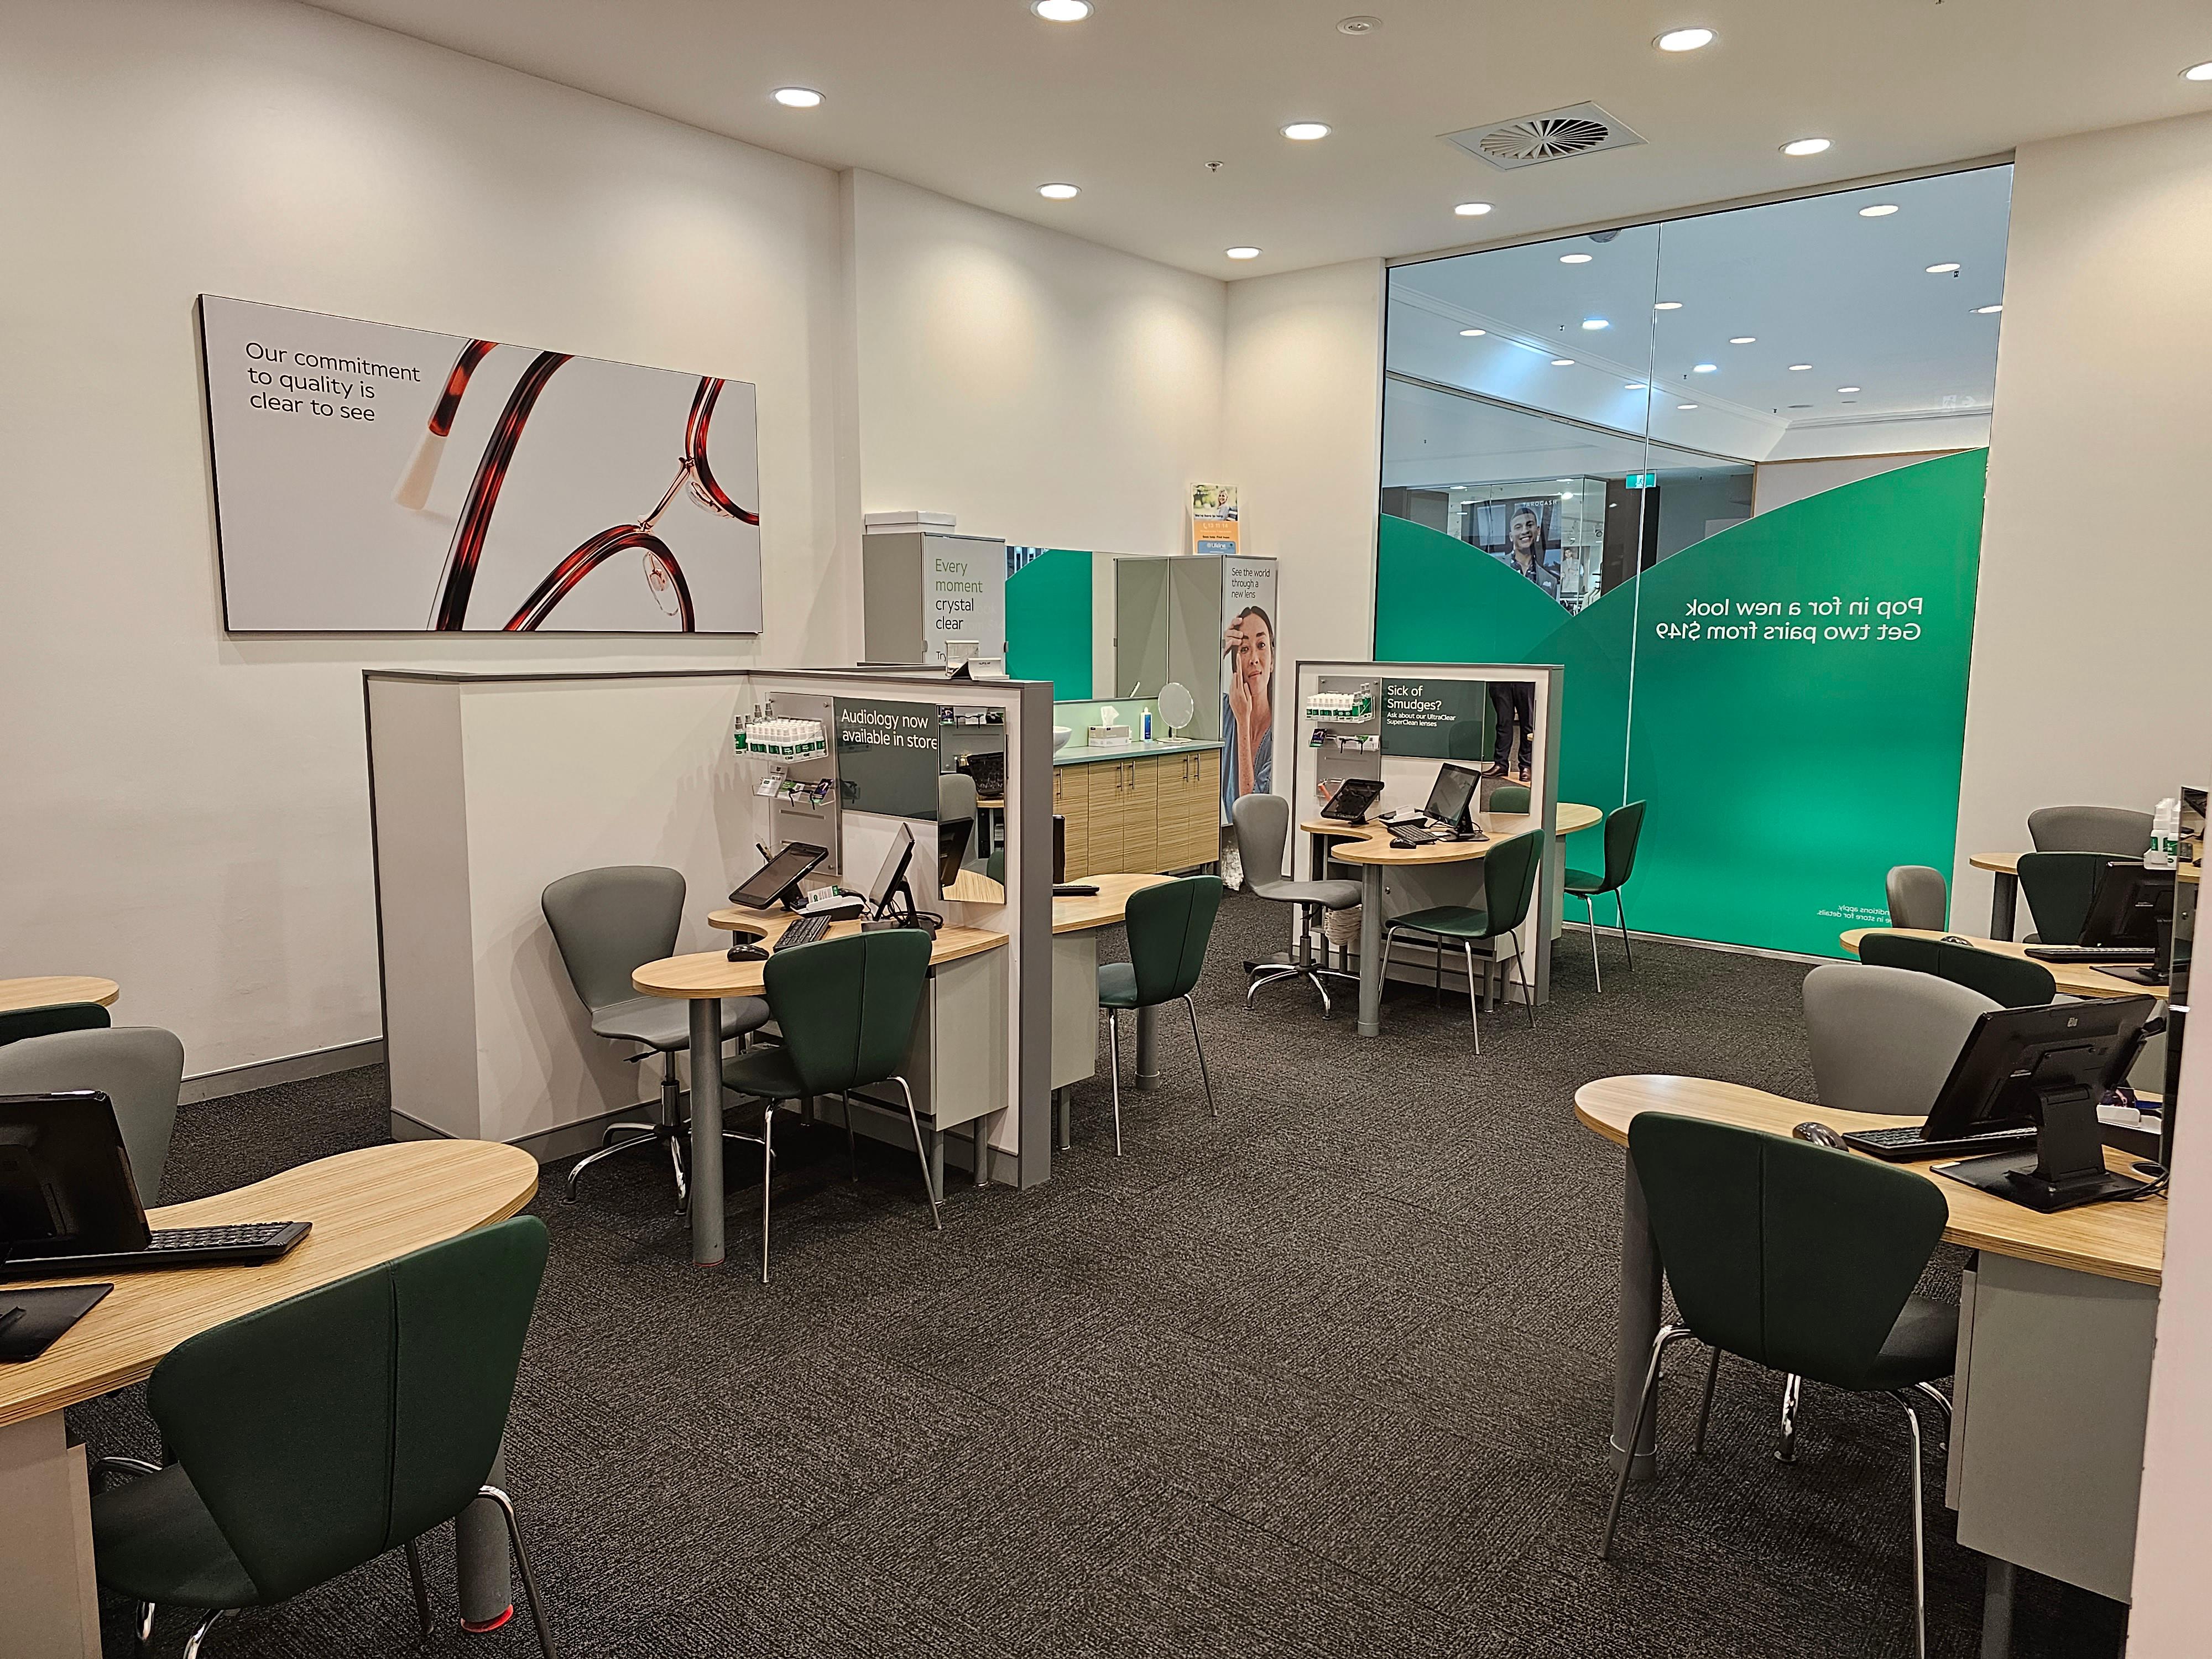 Images Specsavers Optometrists & Audiology - South Point Shopping Centre